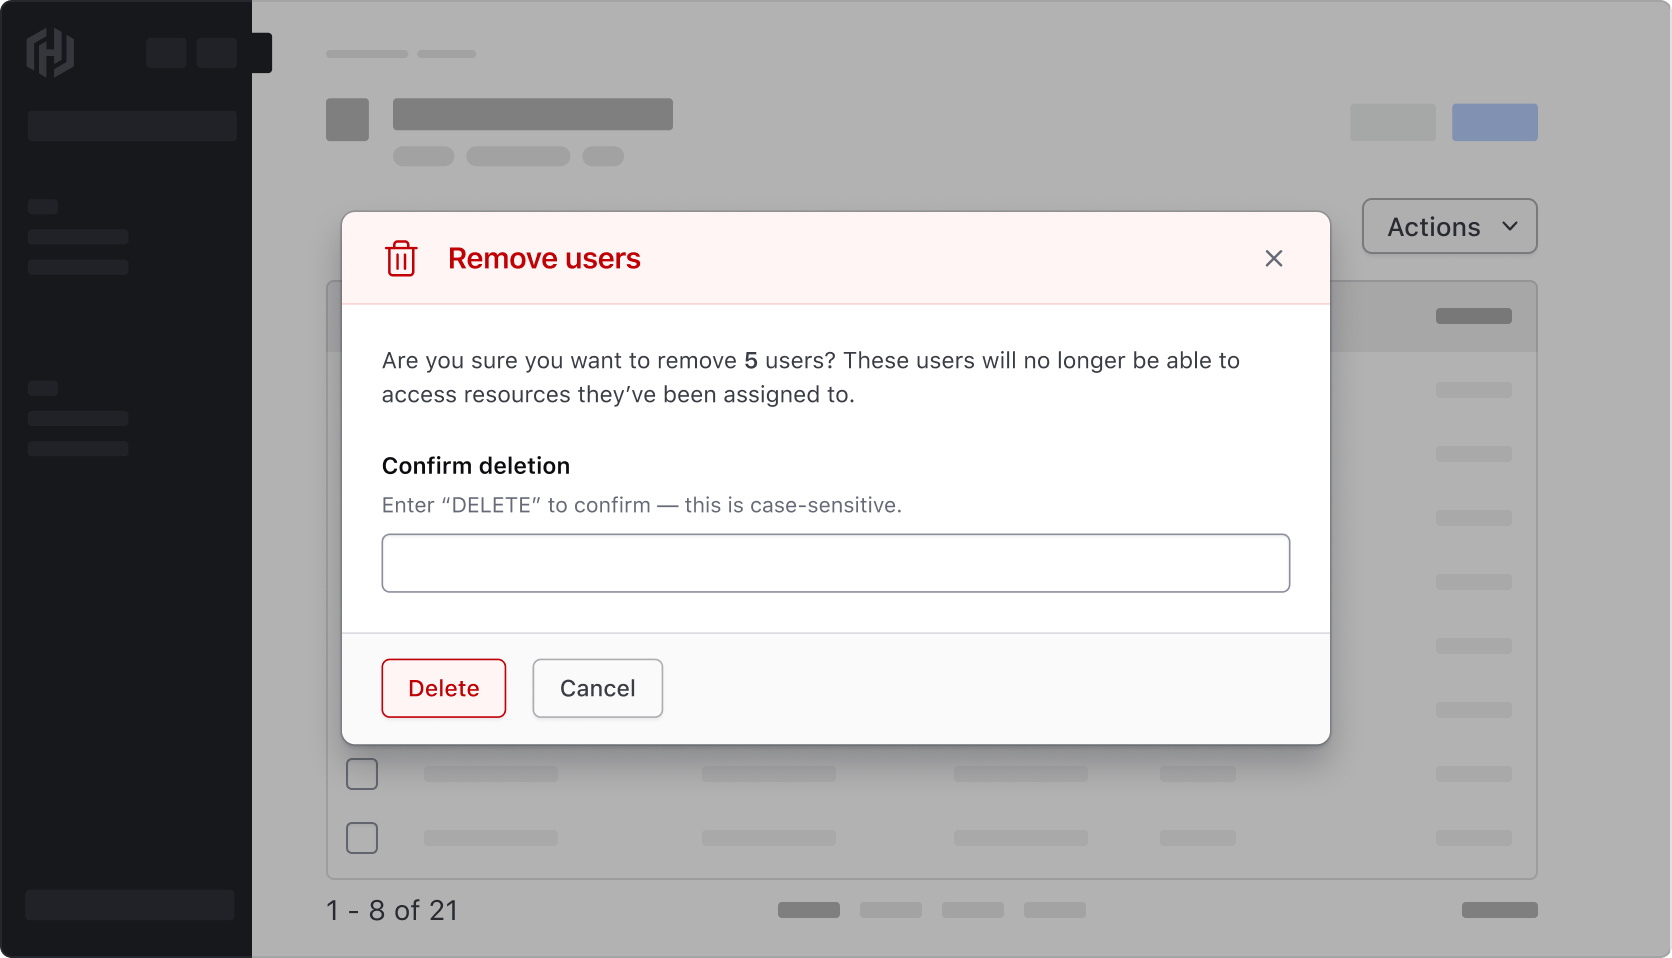 Deleting results in a Modal